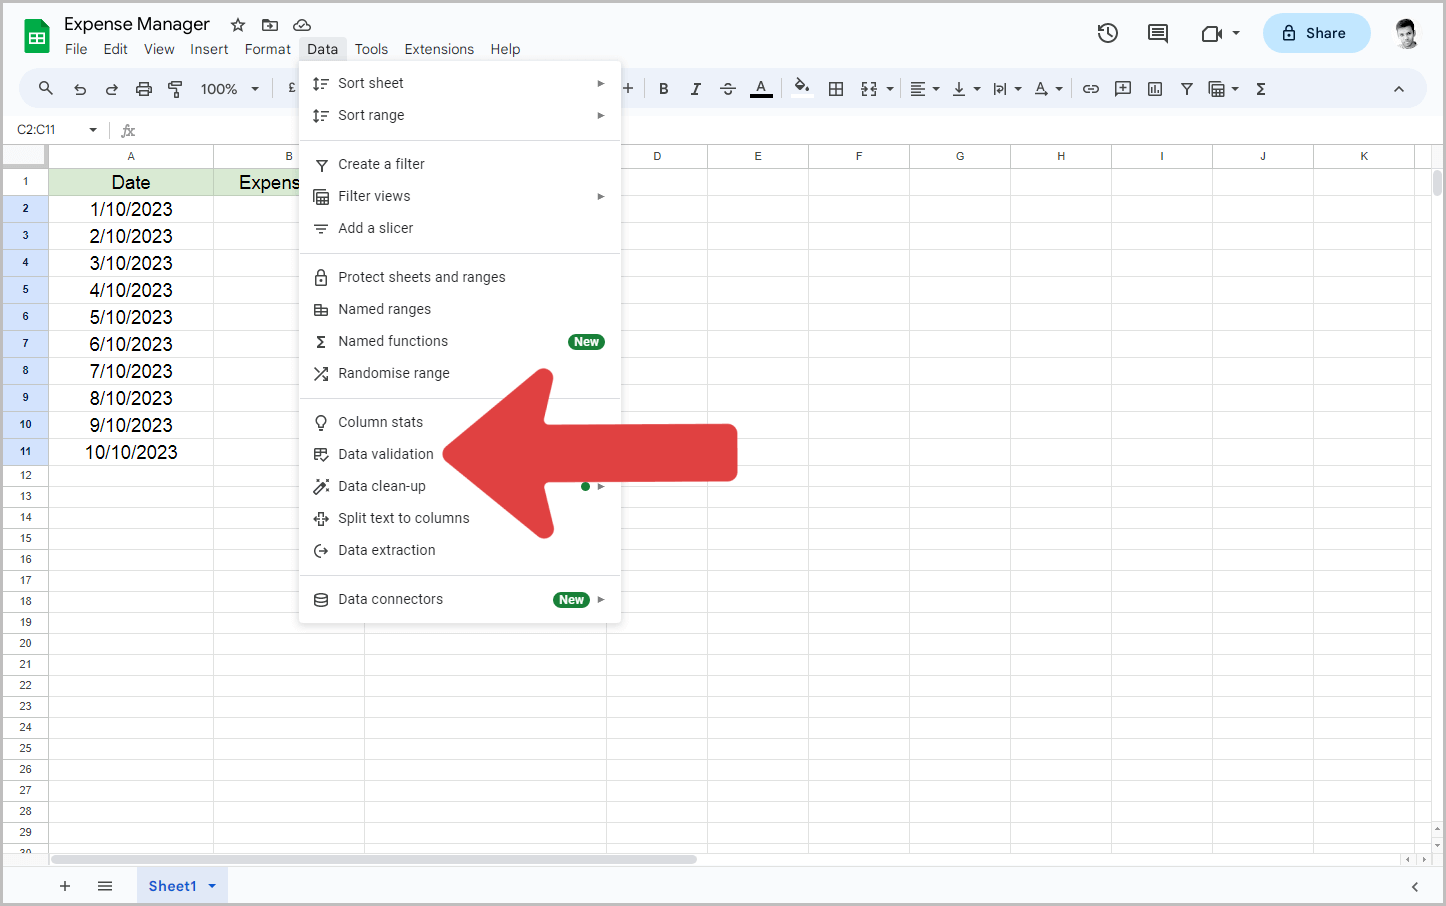 How to Add Categories in Google Sheets